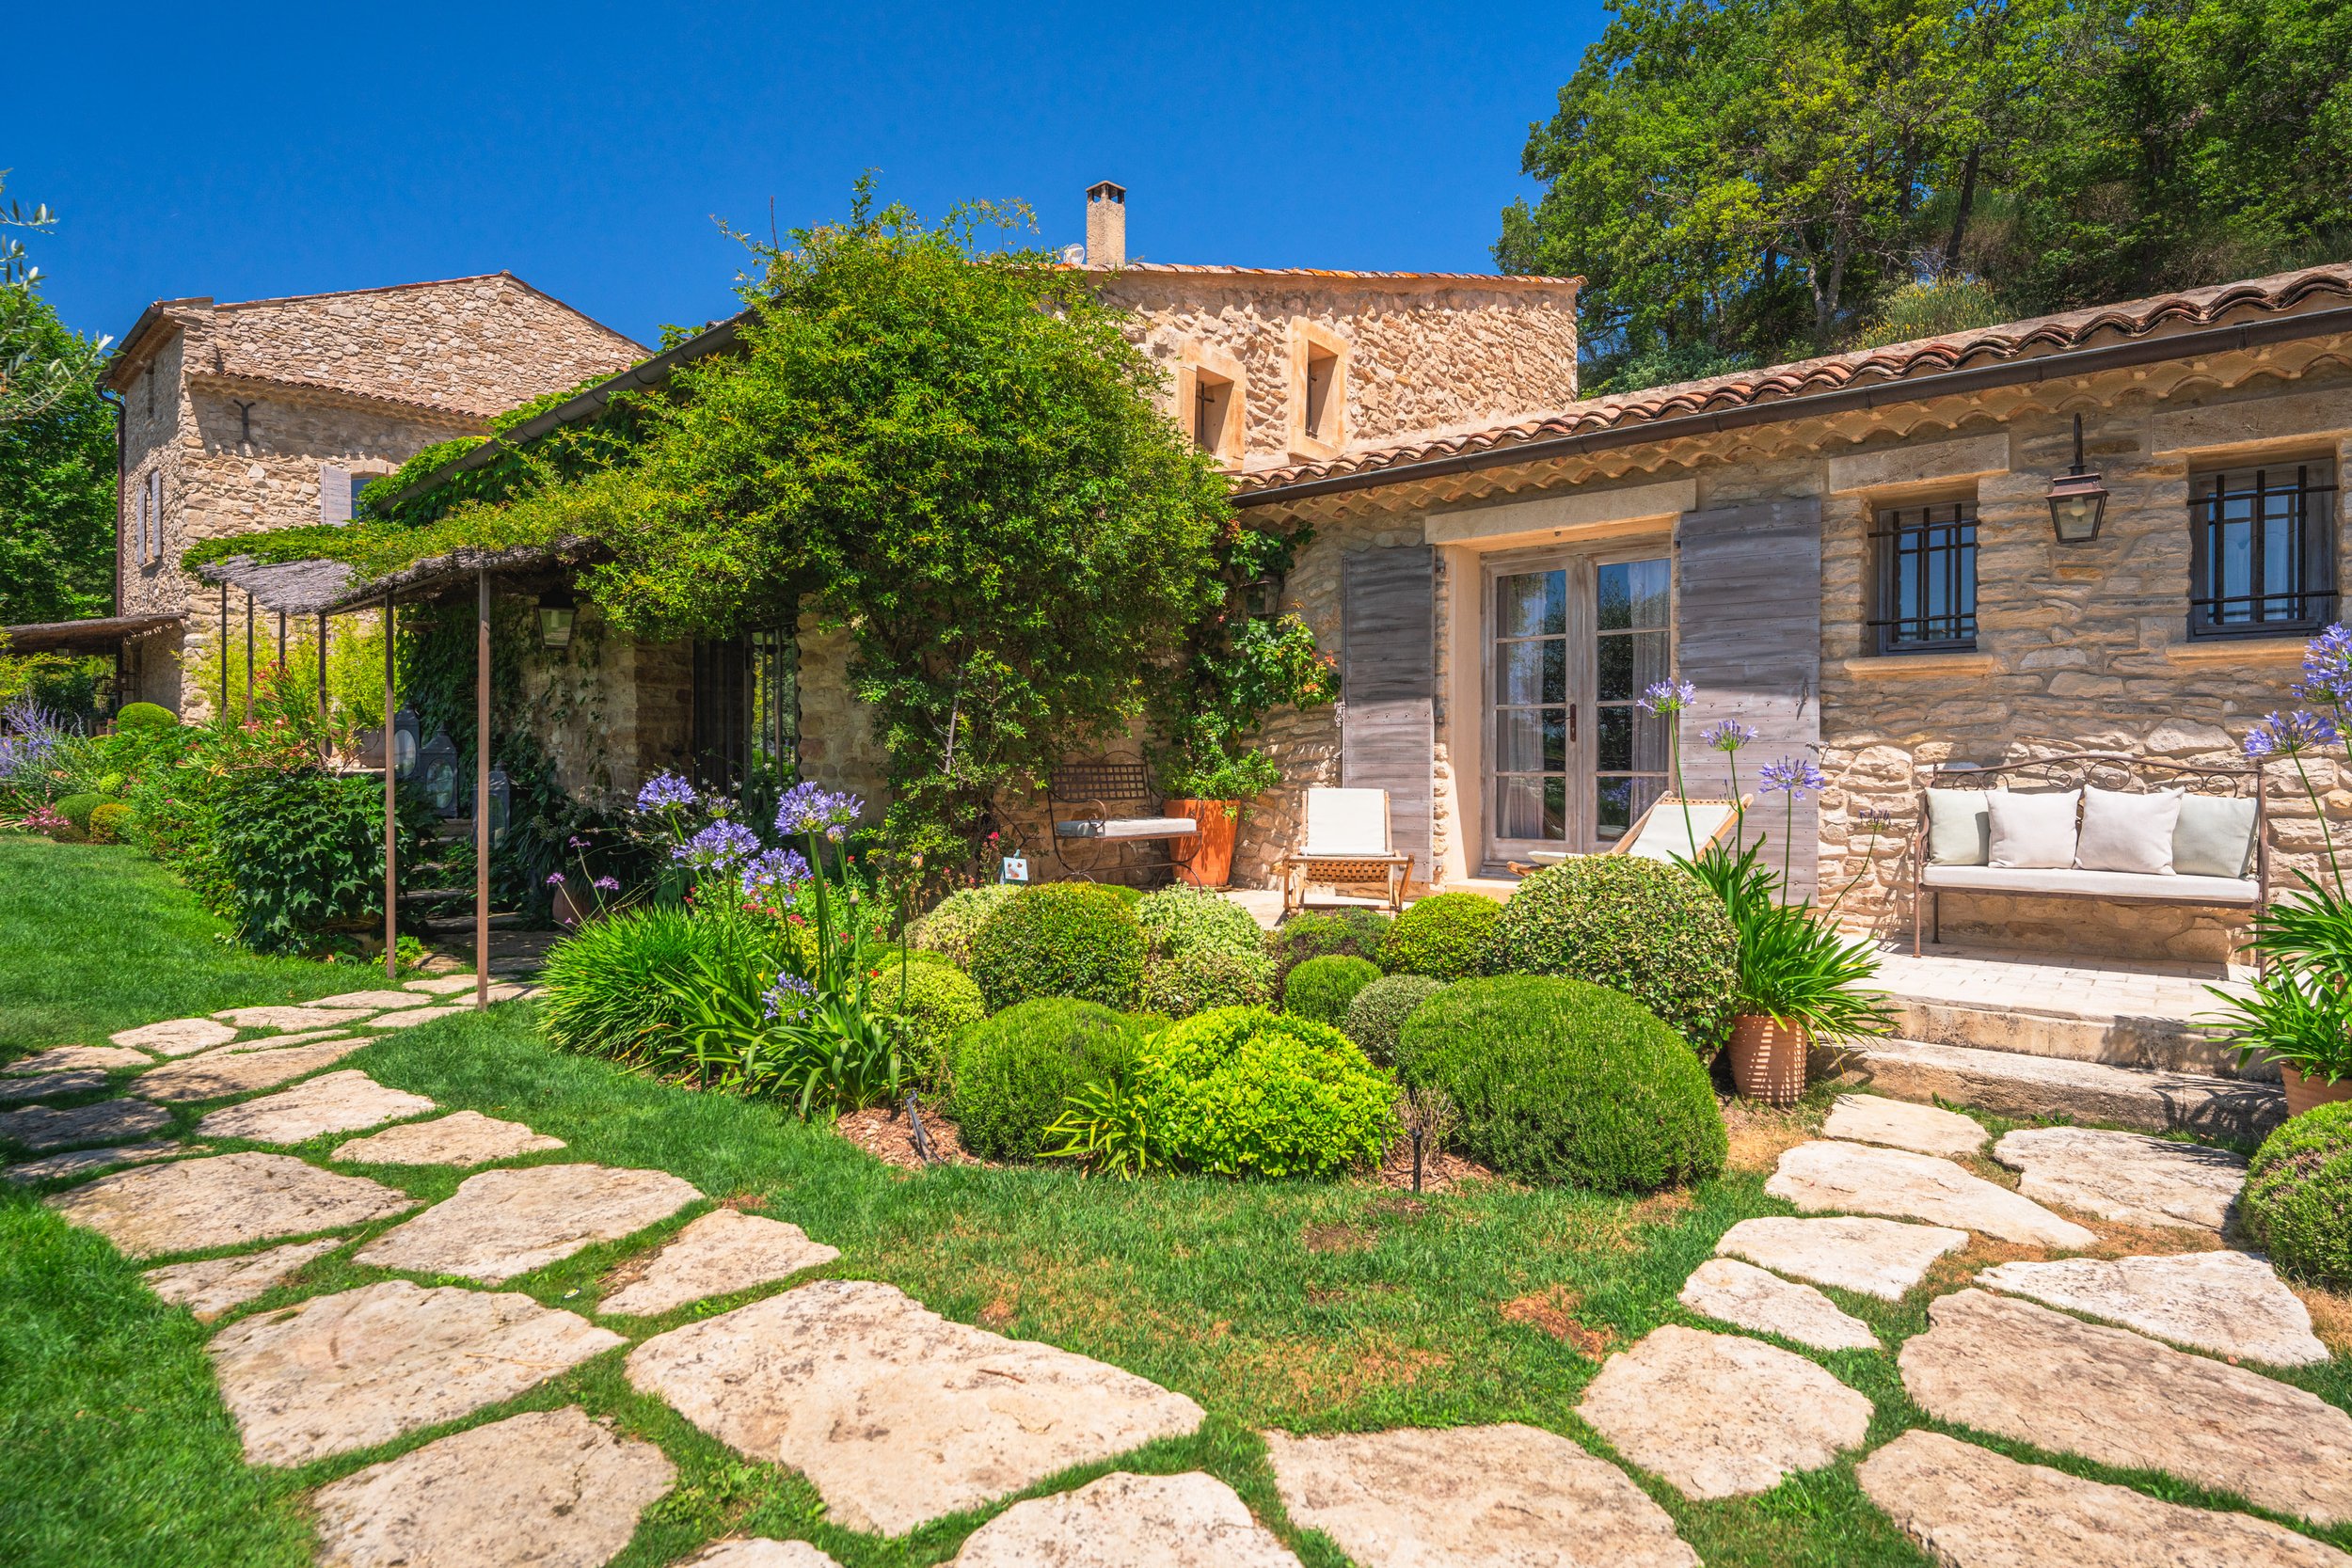 Francis+York+French Country Estate in the South Luberon 00006.jpg